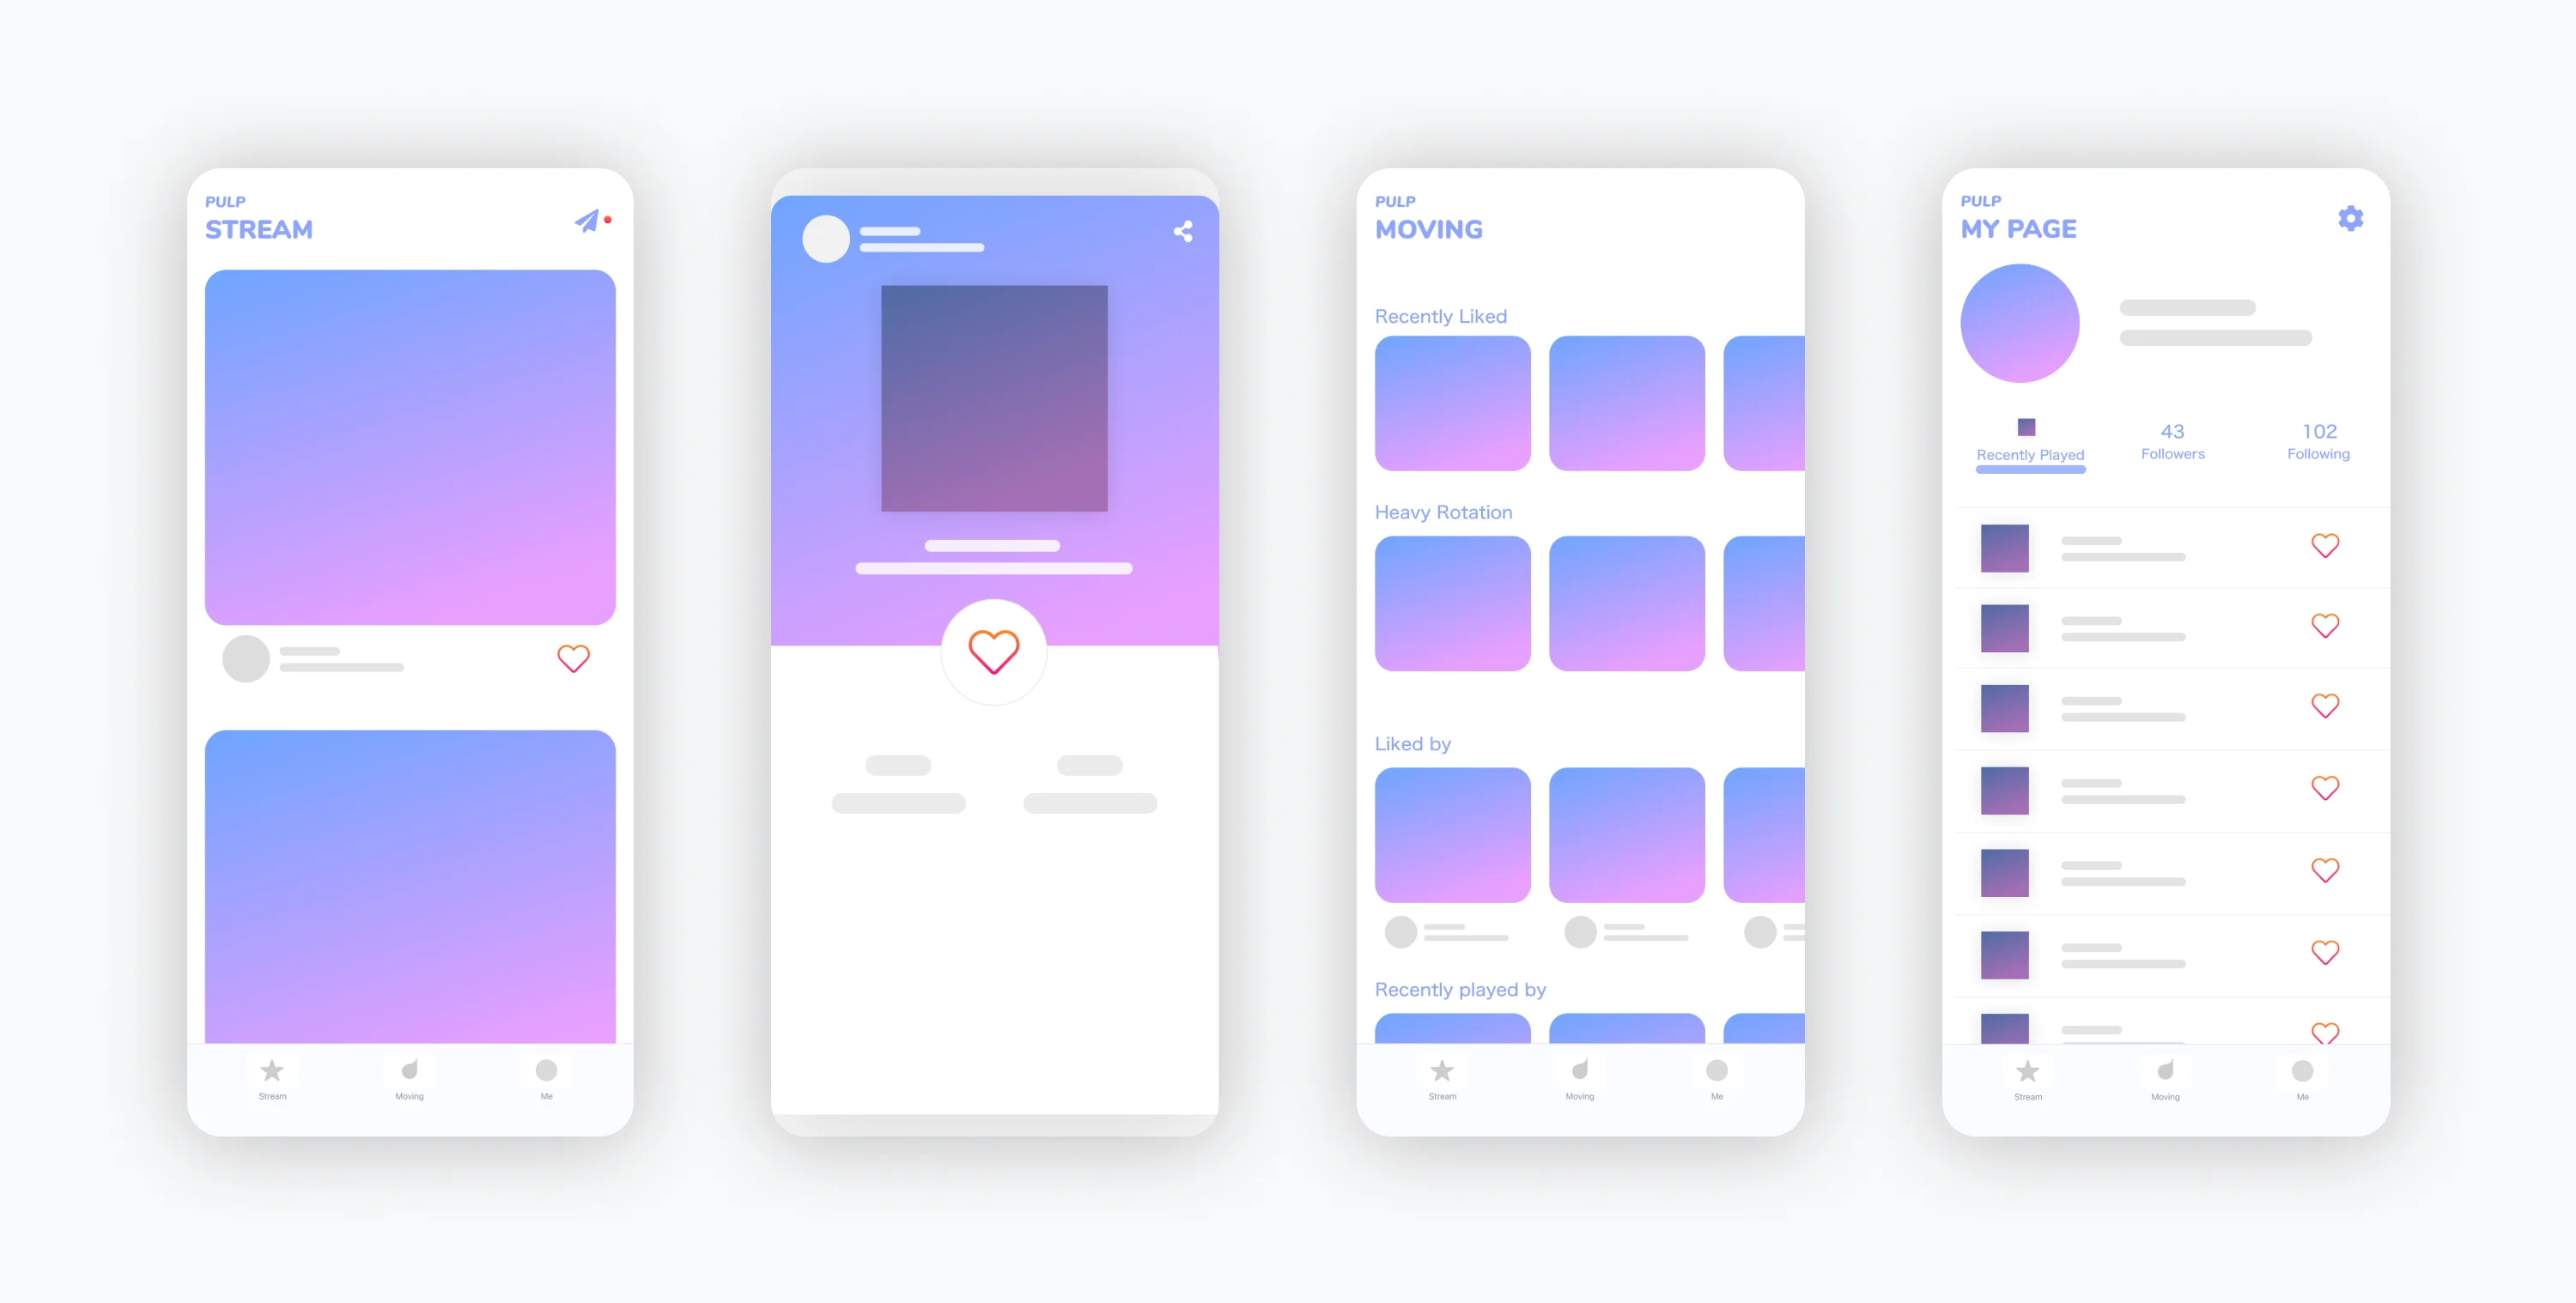 The initial wireframes for the mobile app design